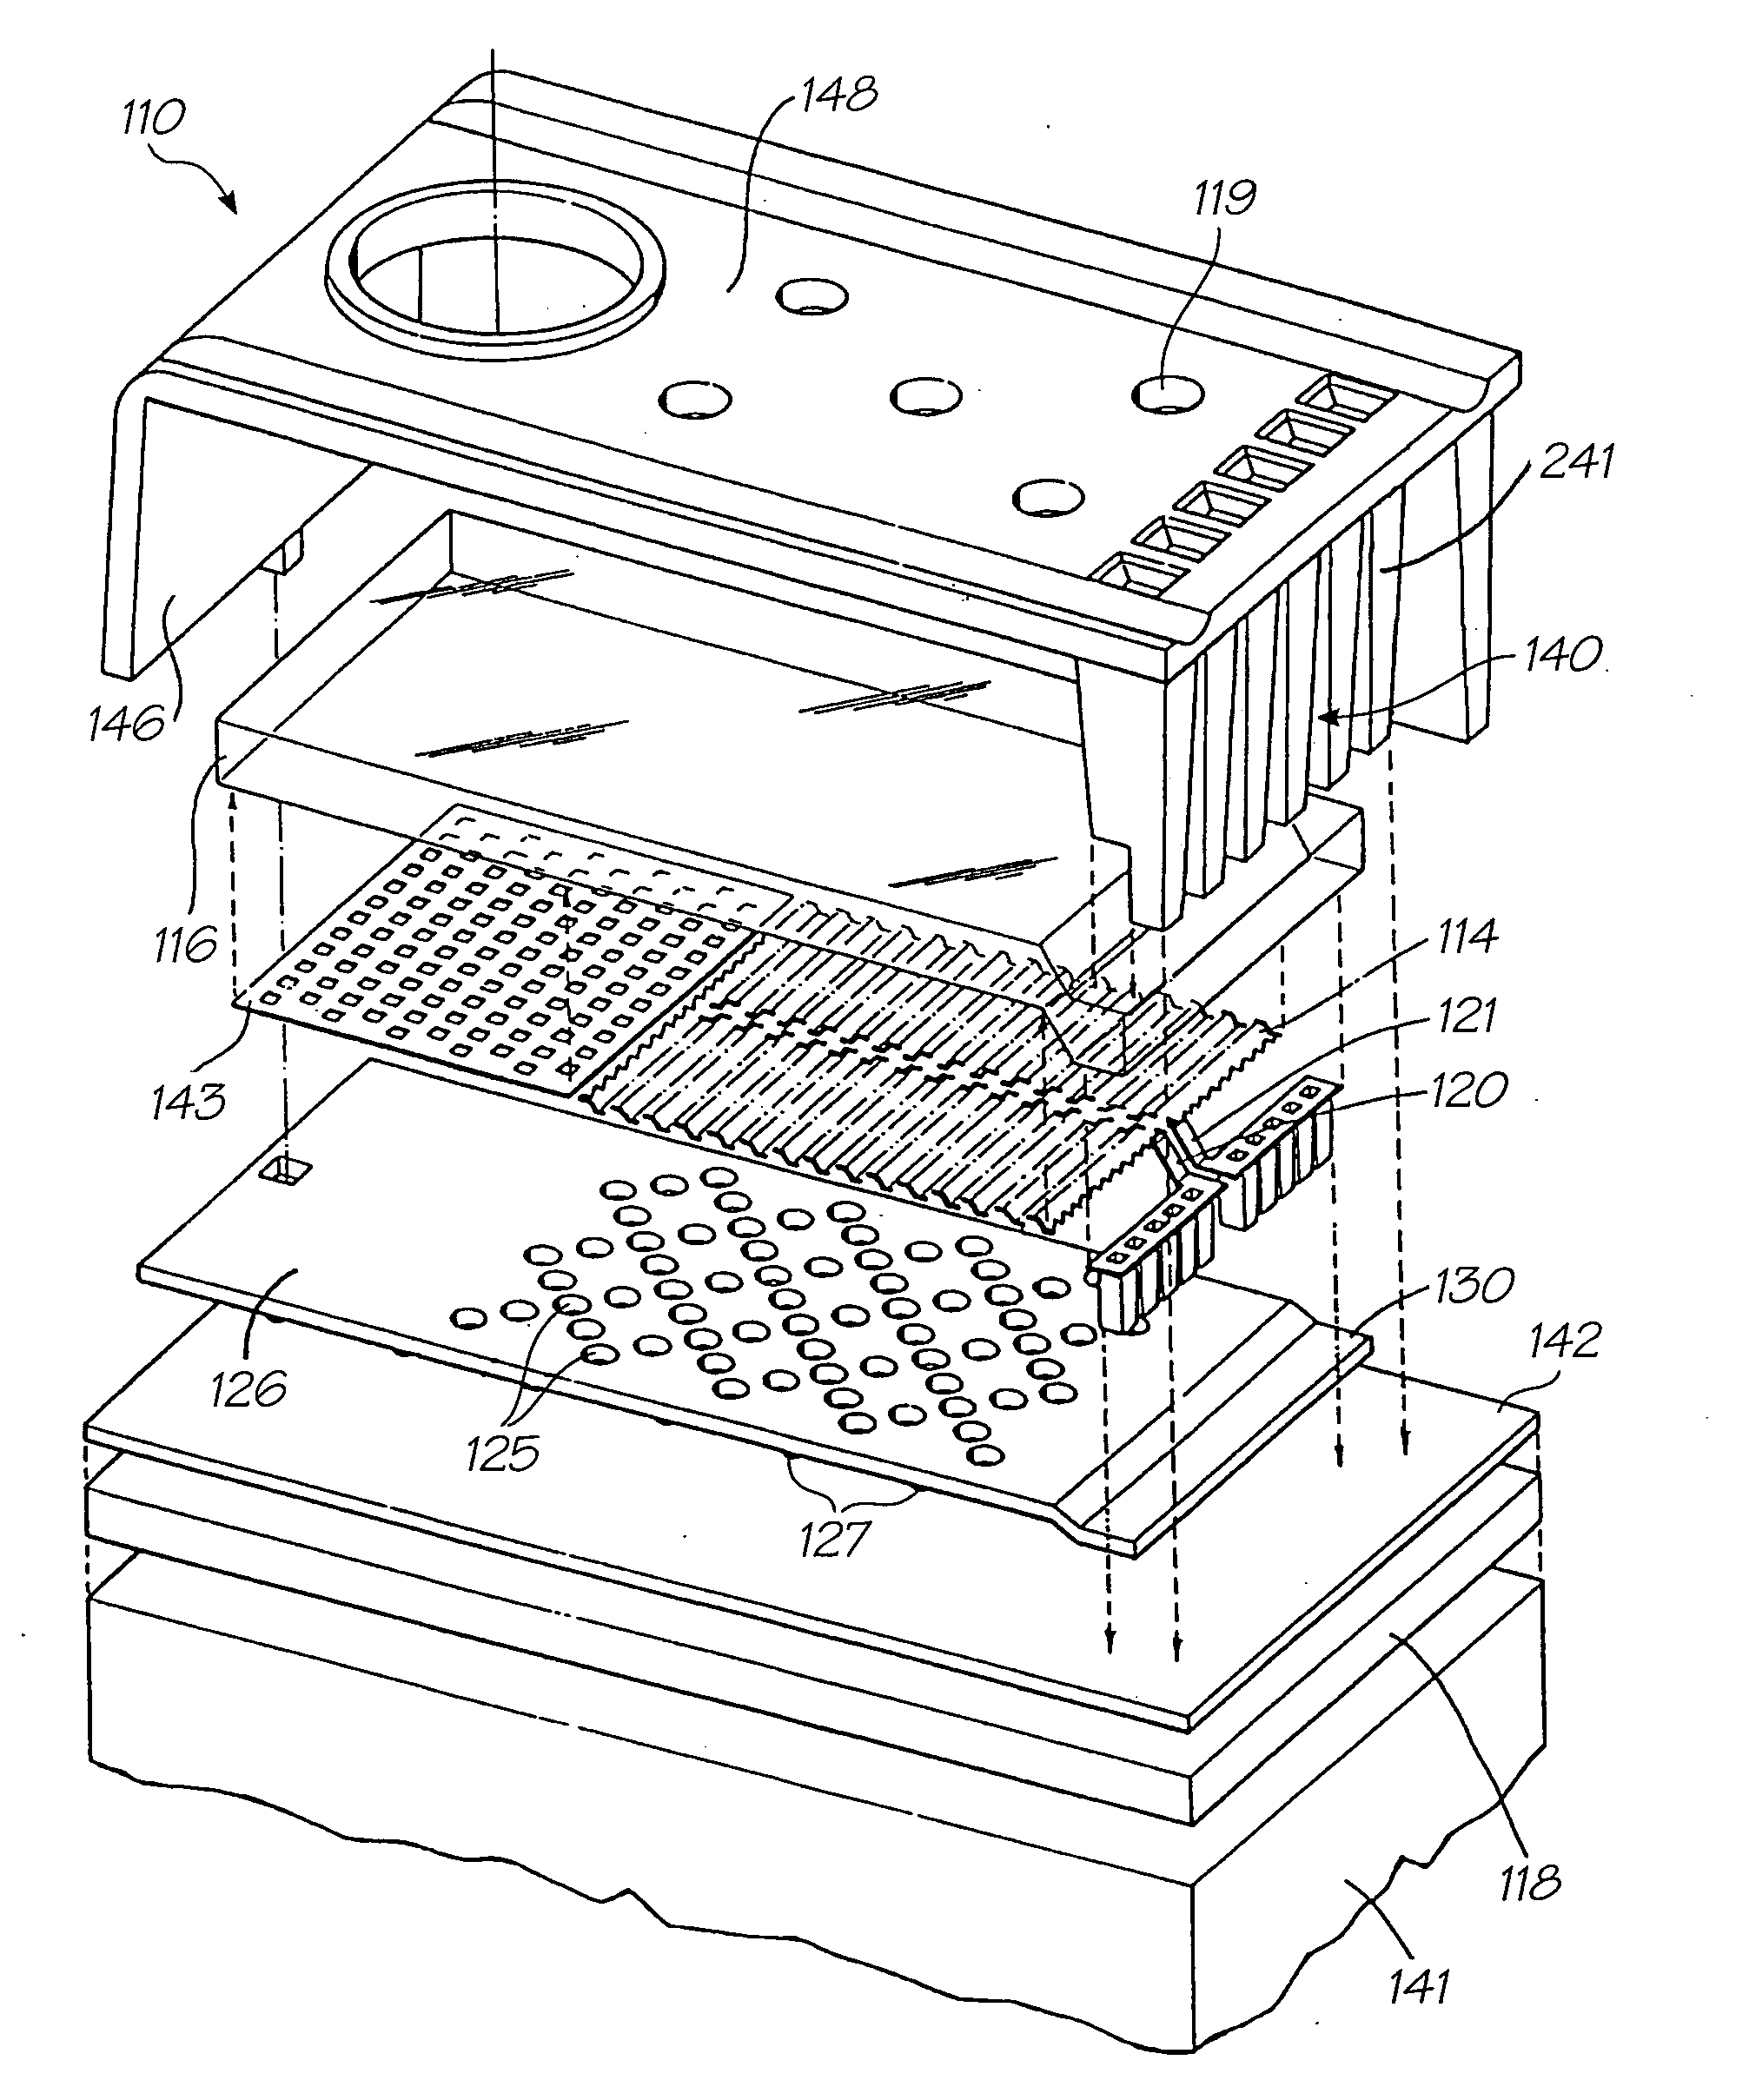 Printhead integrated circuit with ink supply from back face